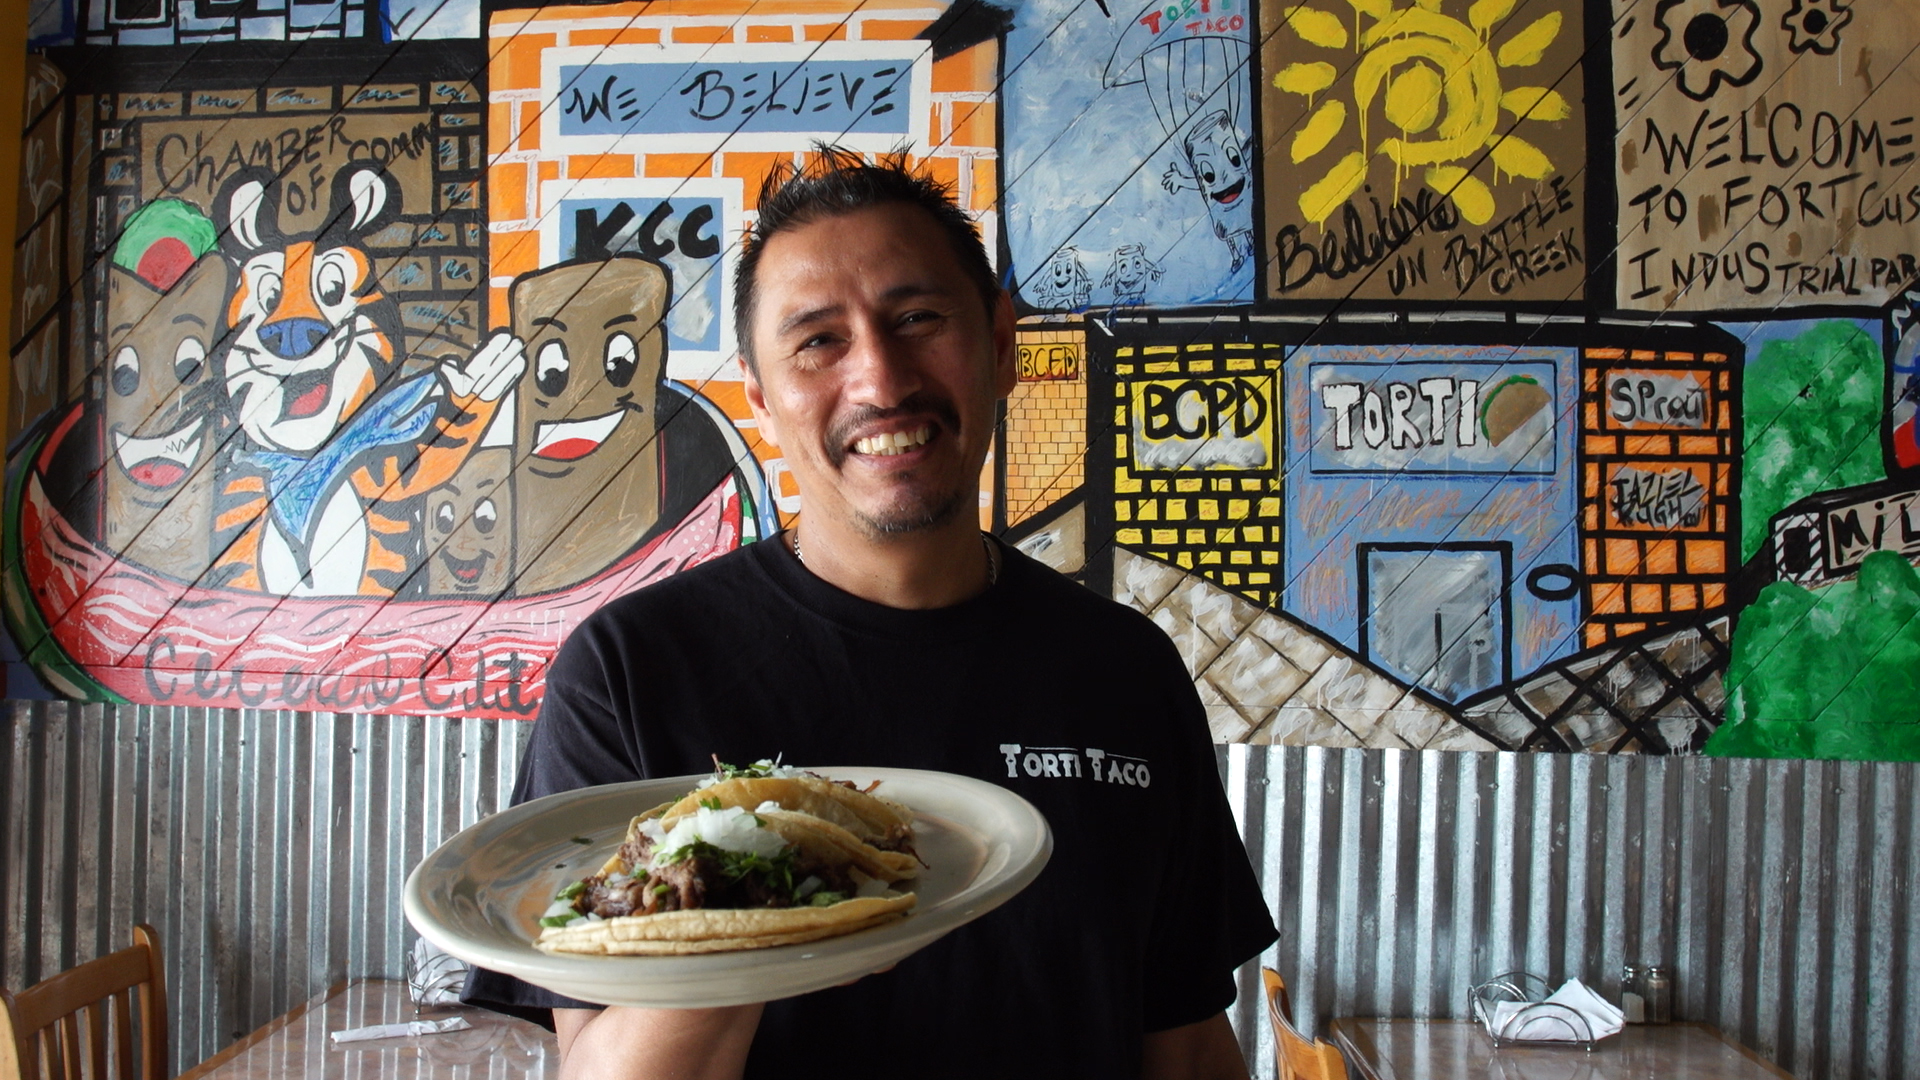 Javier poses with a plate of tacos.